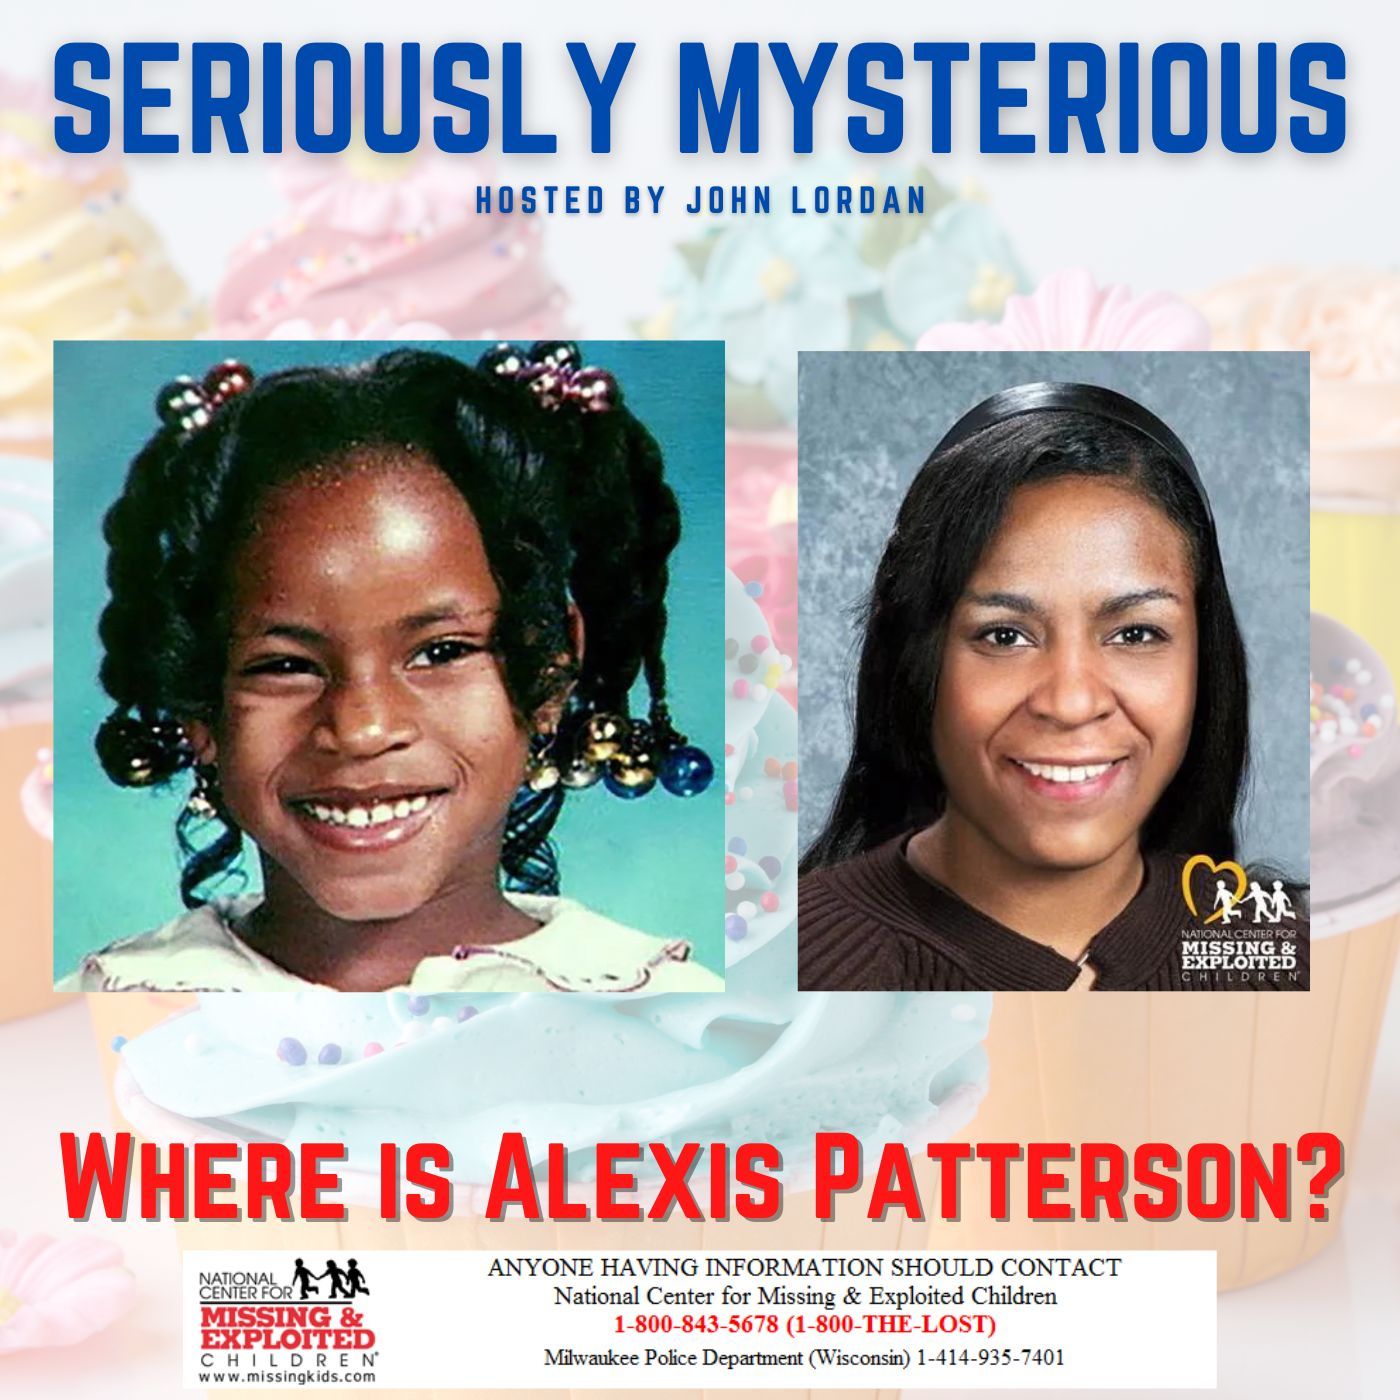 Where is Alexis Patterson?